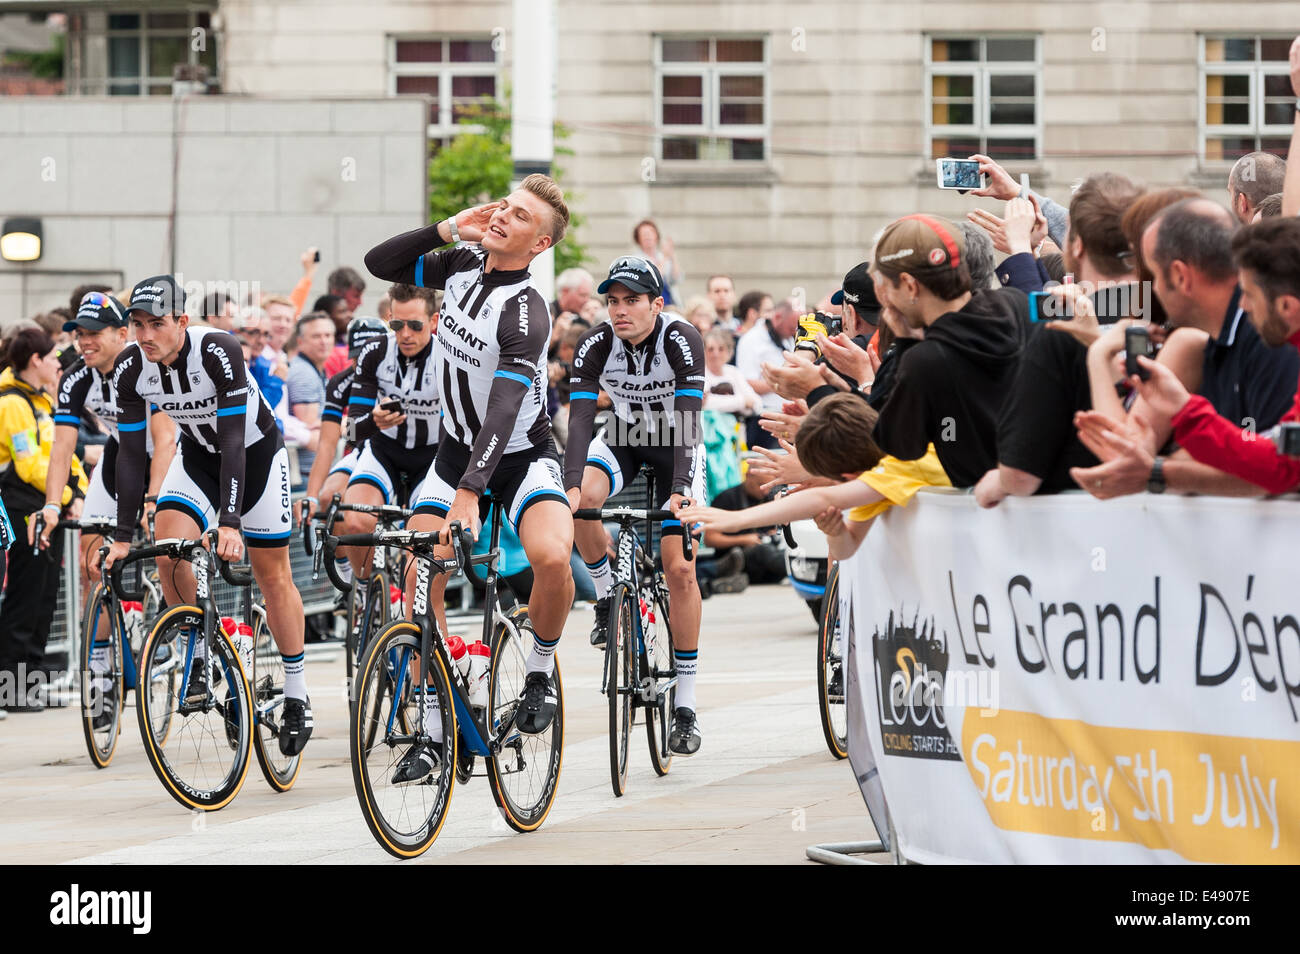 Marcel Kittel riding through Millennium Square in Leeds as the Shimano riders make their way to the opening ceremony. Stock Photo